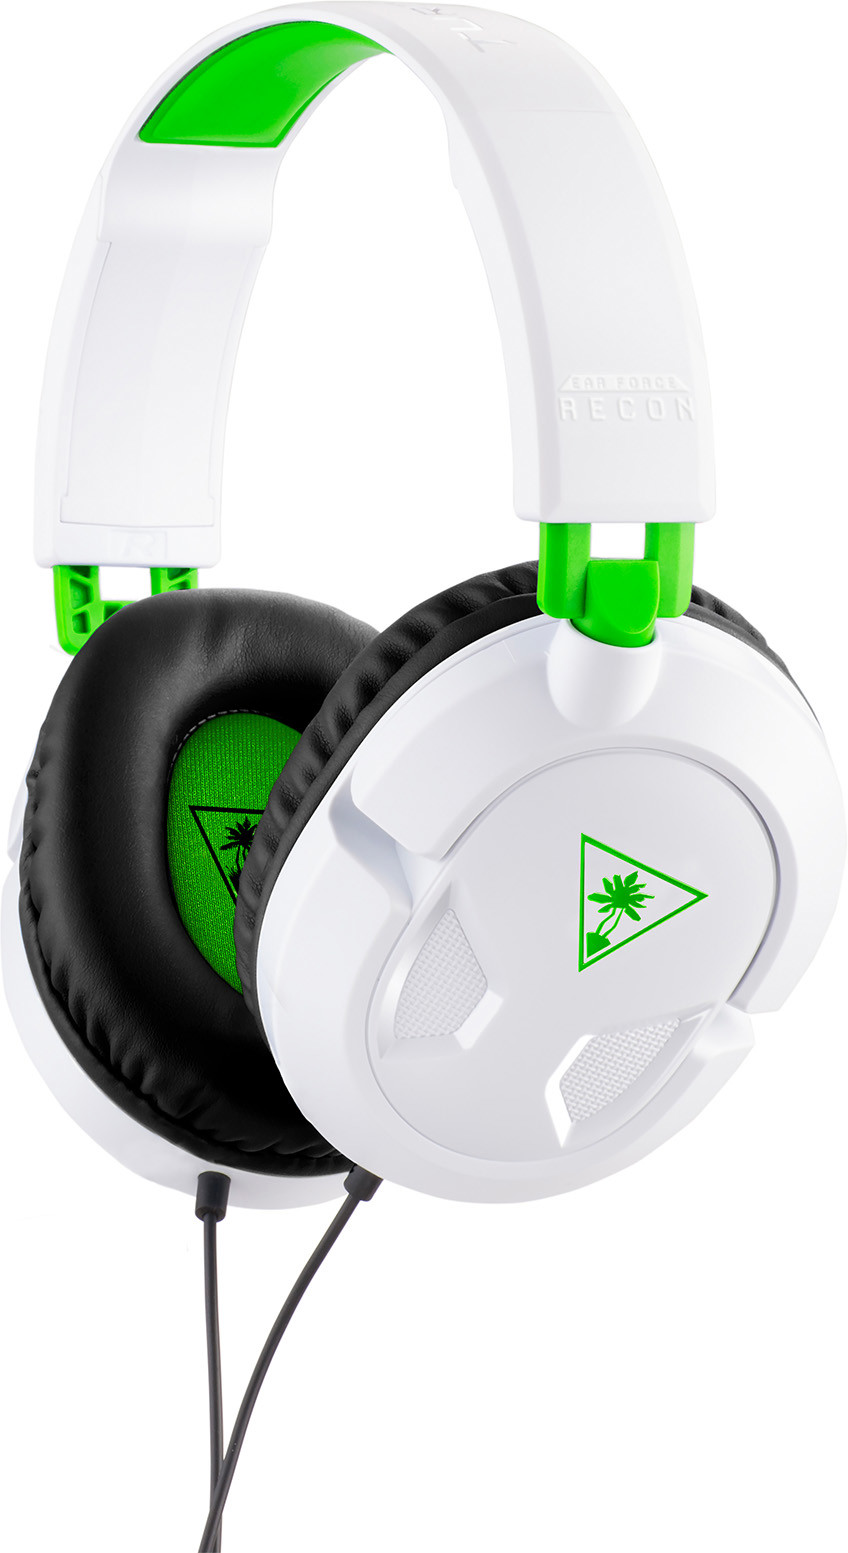 turtle beach audio hub searching for device